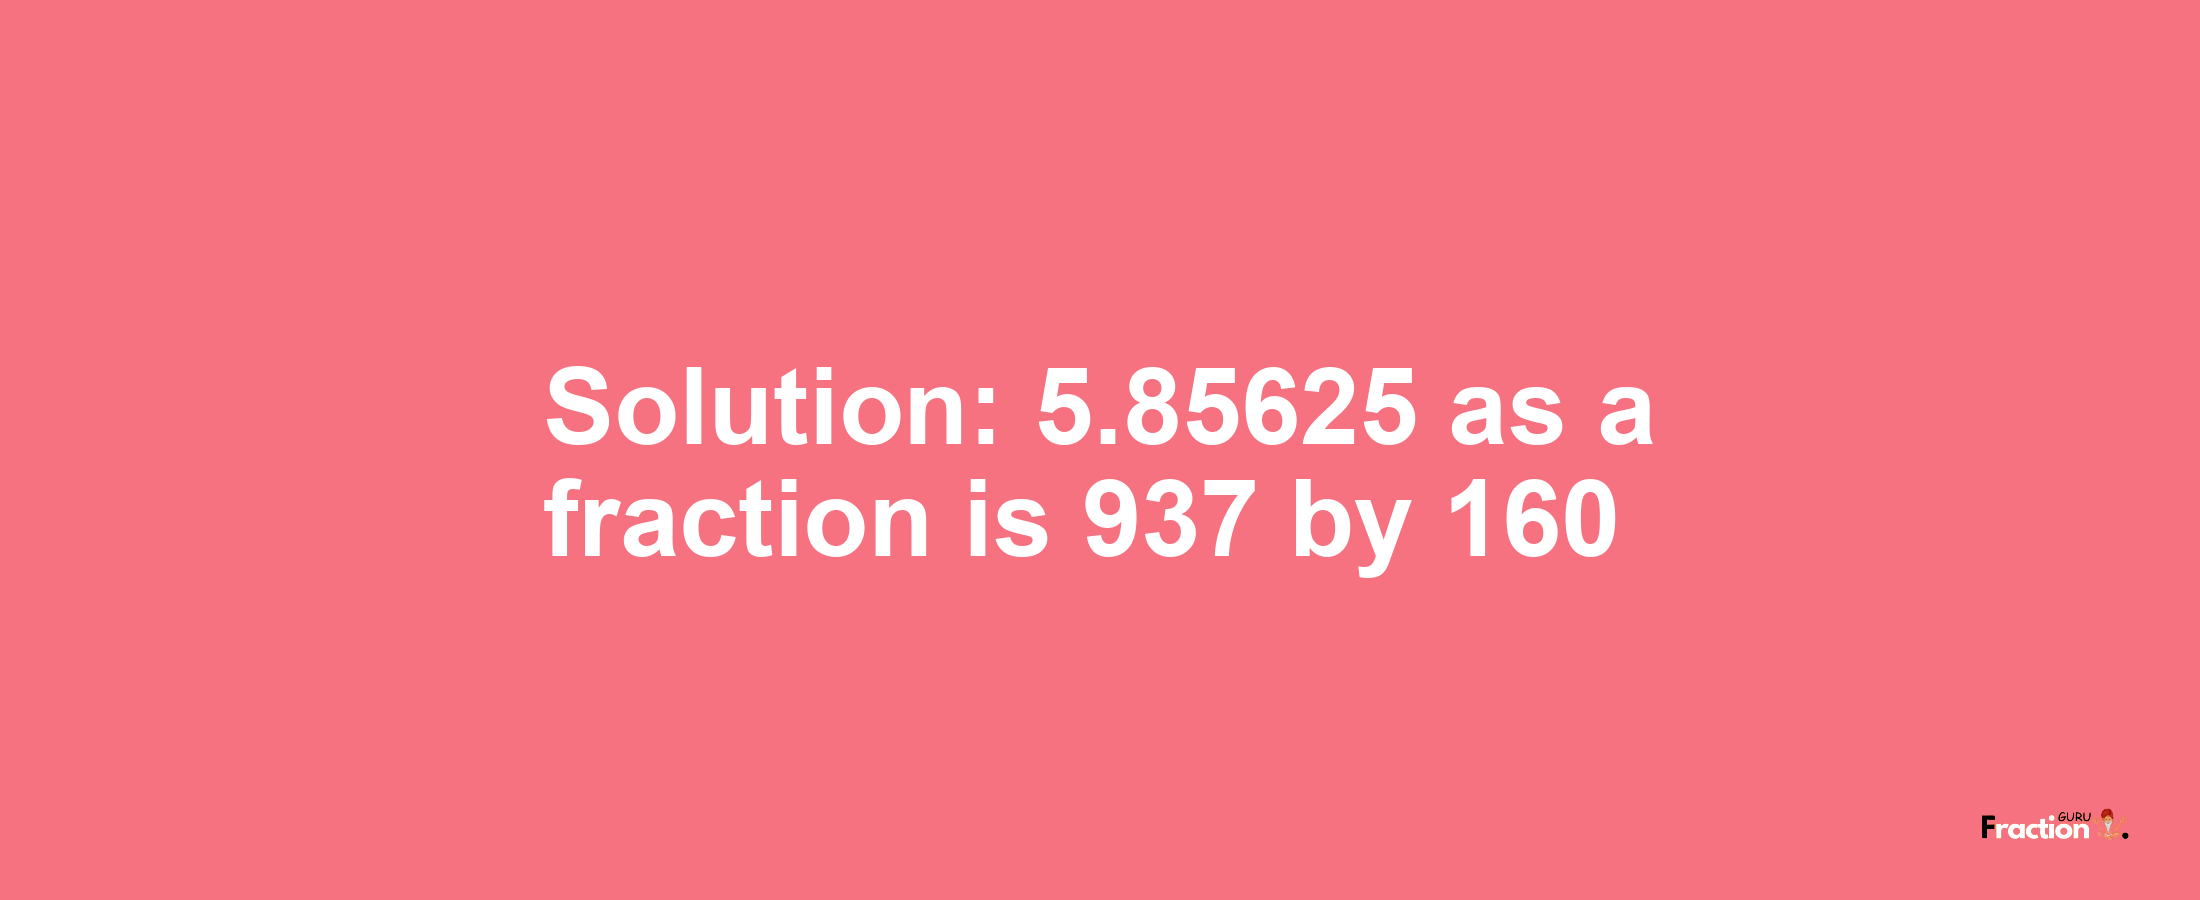 Solution:5.85625 as a fraction is 937/160